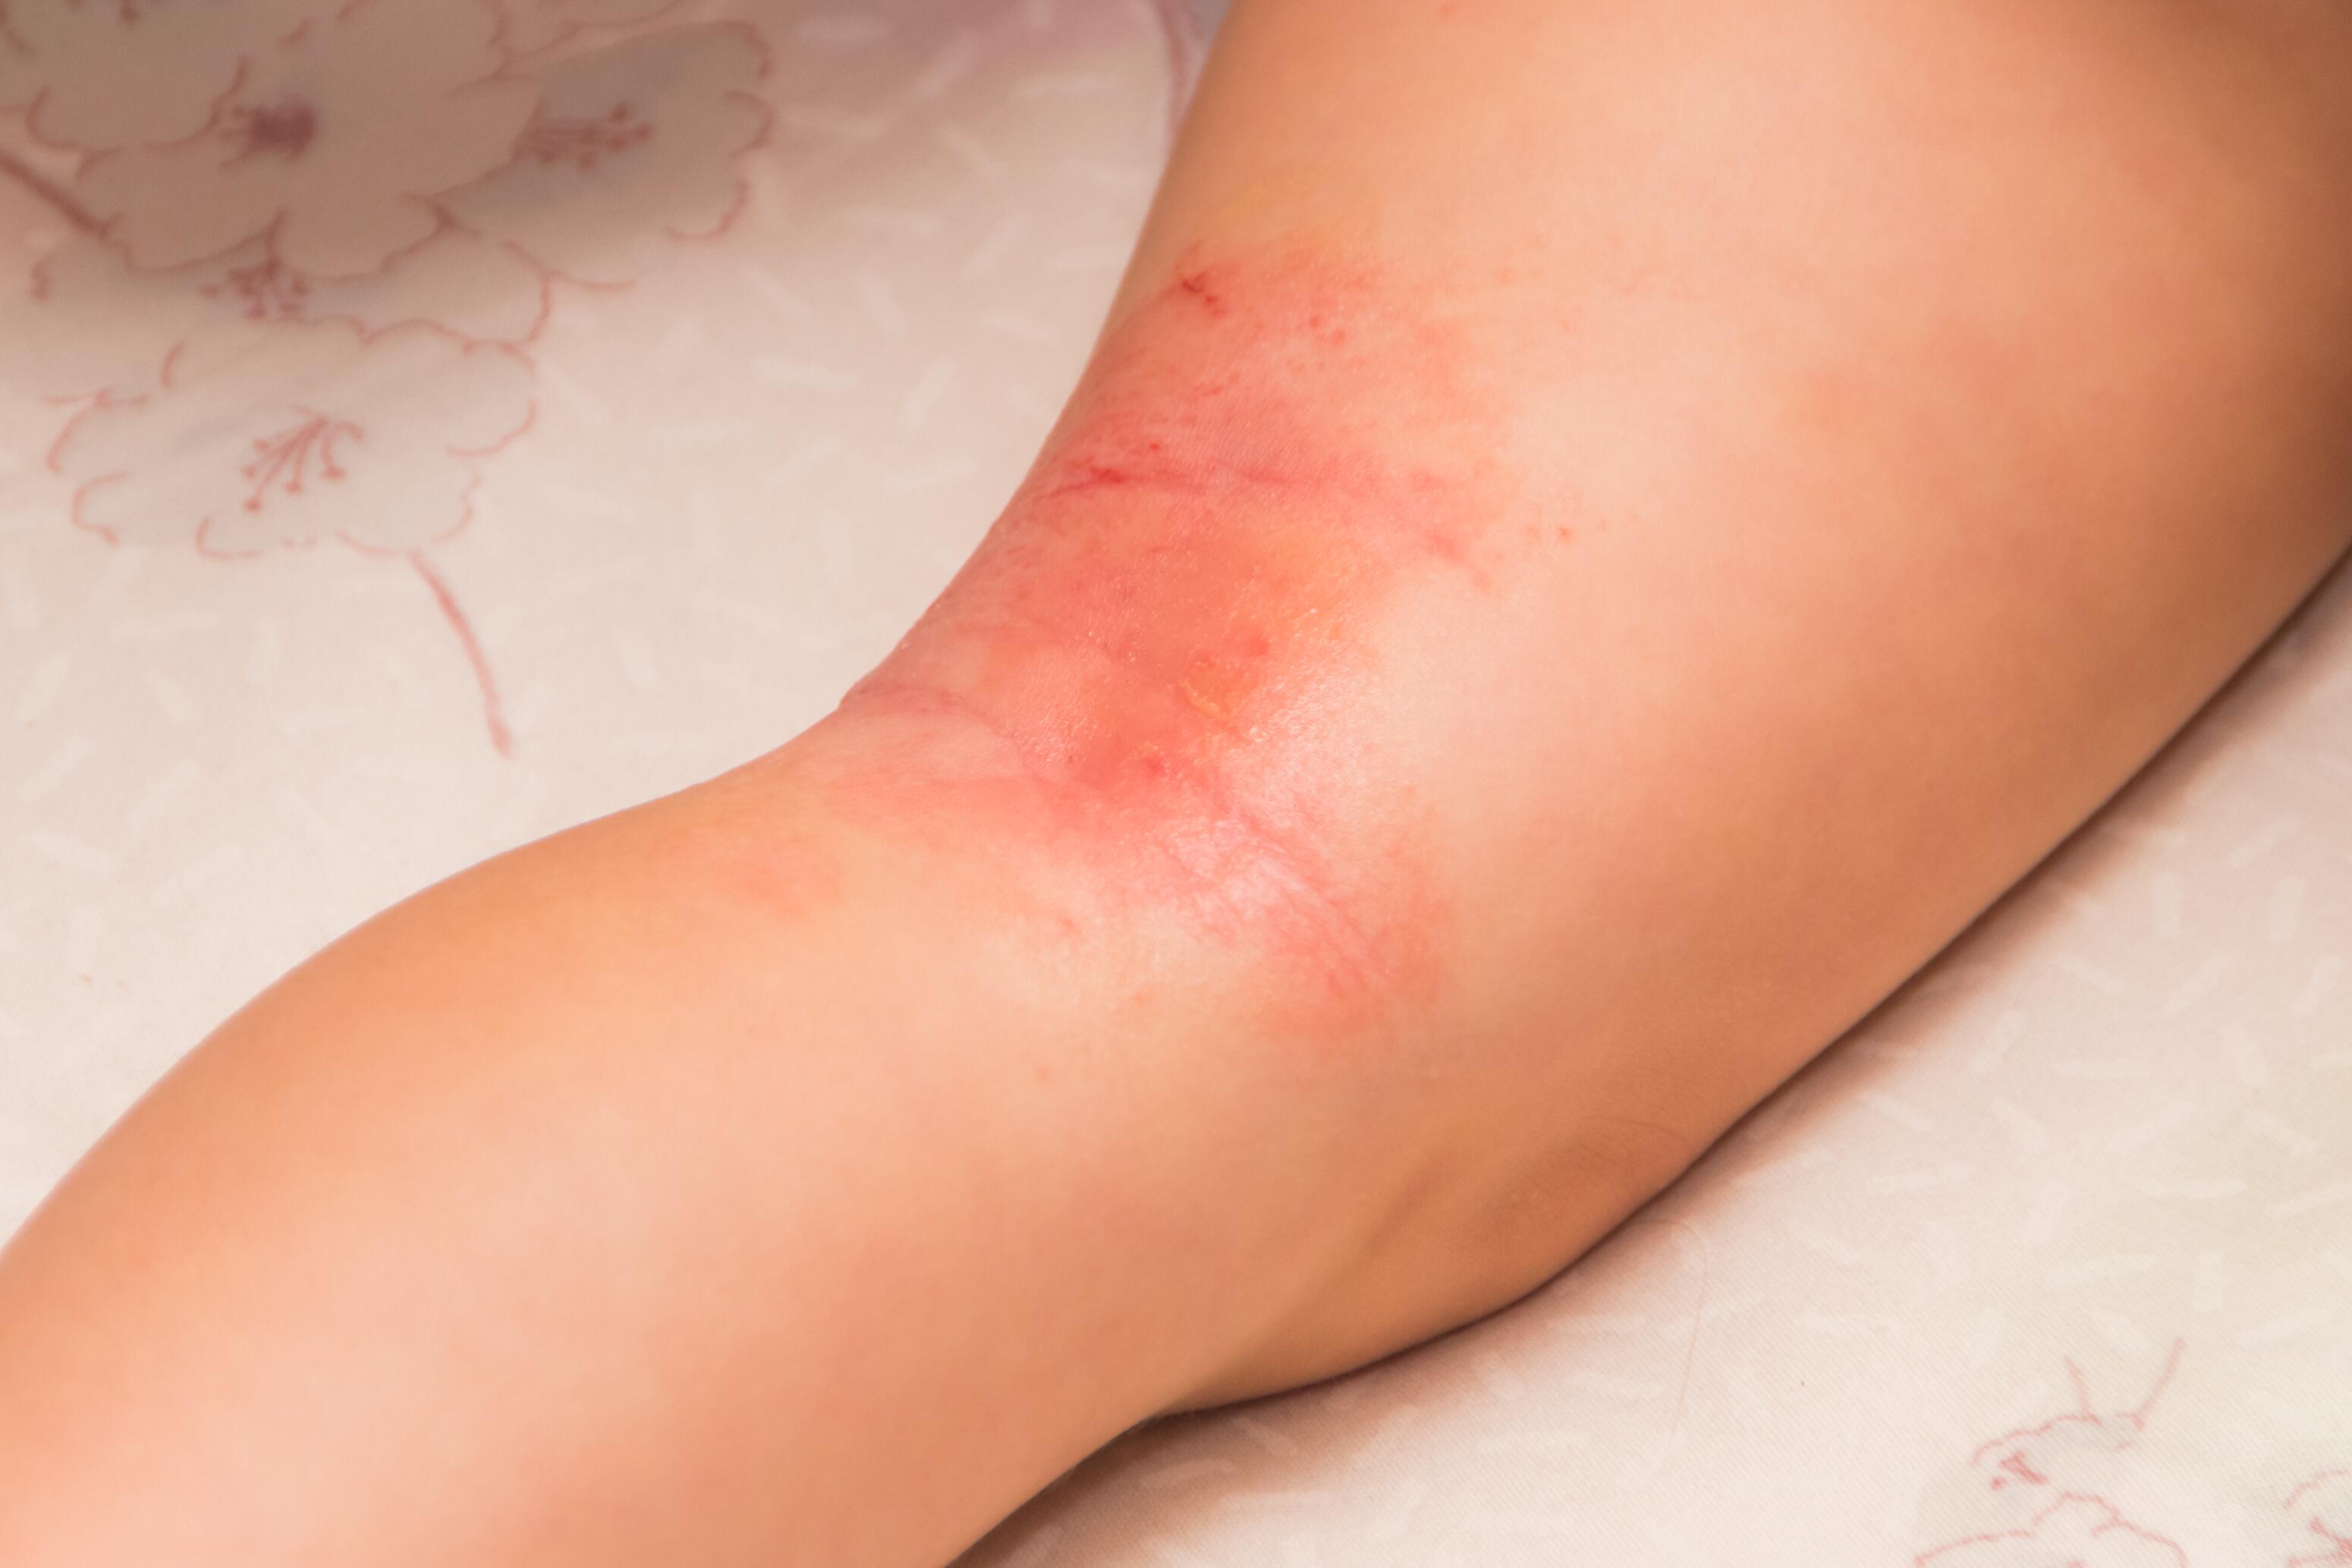 Leg with eczema lesions in the crease of the knee